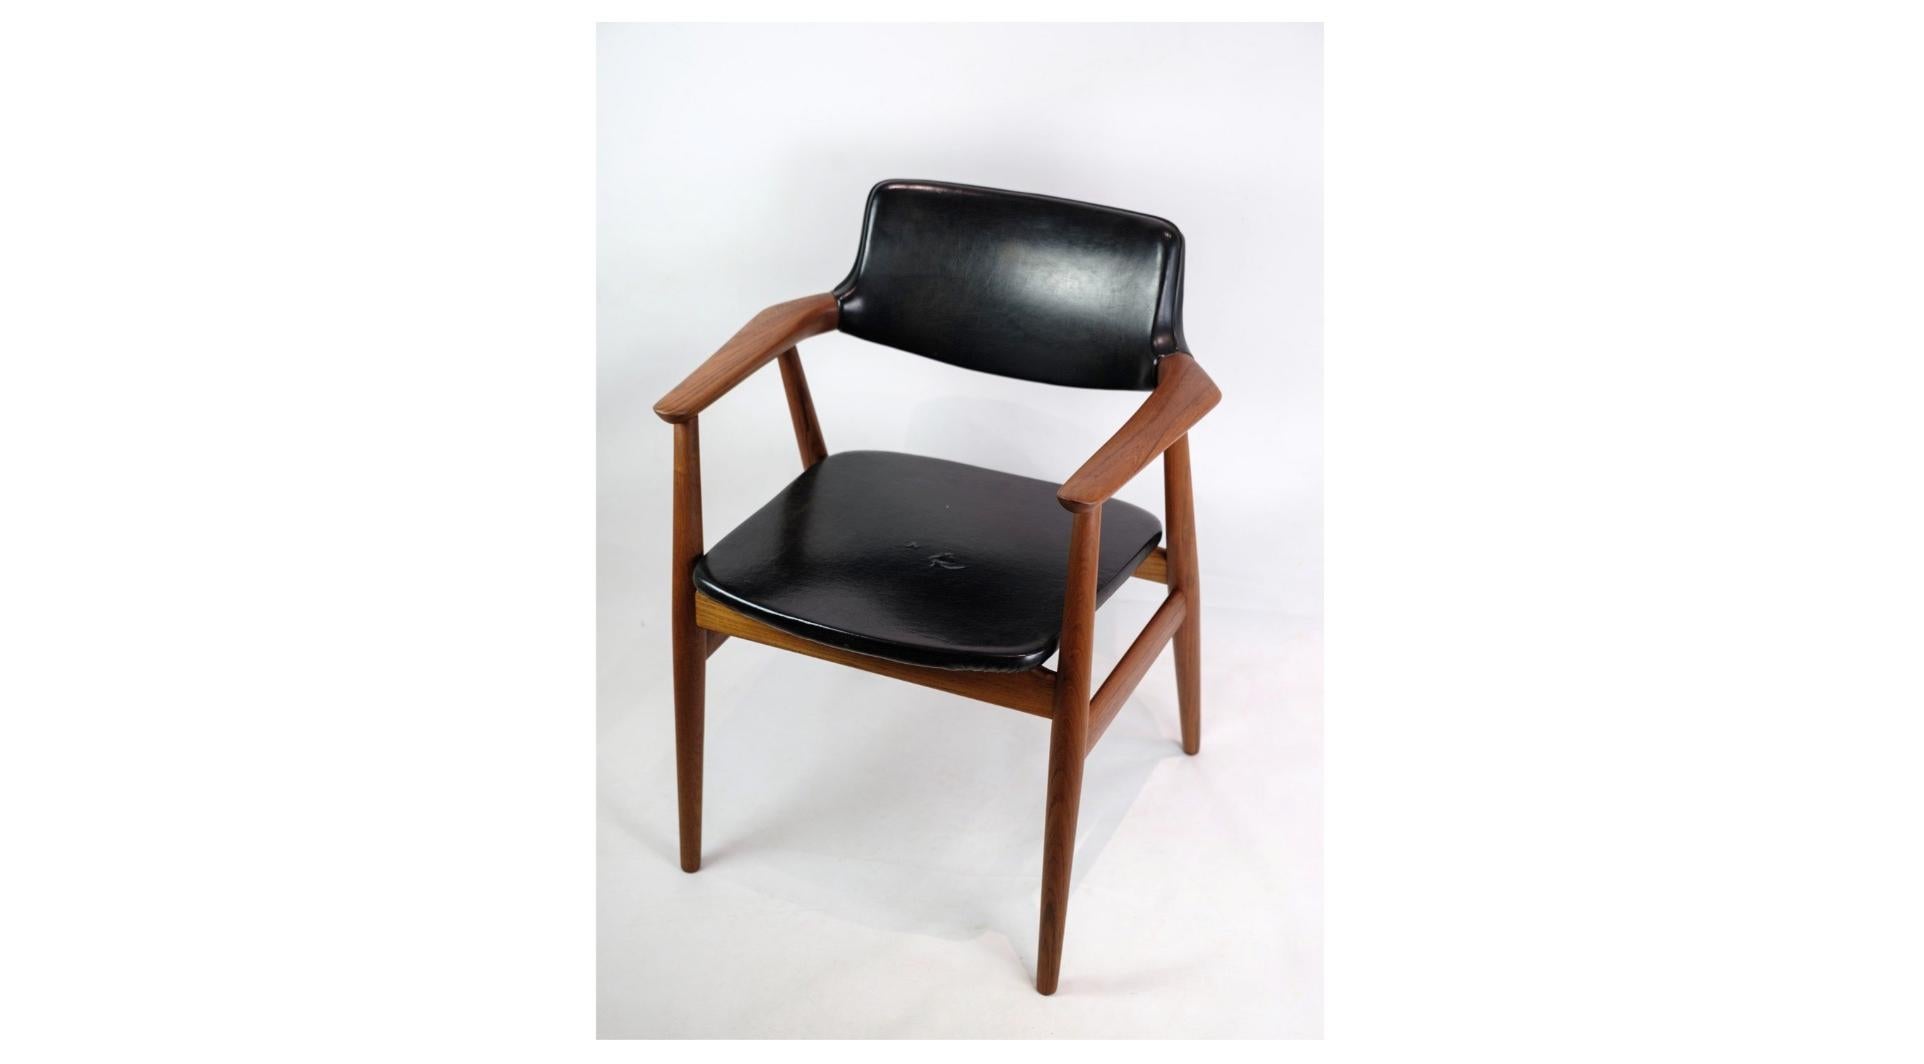 Armchair, model GM11 with solid teak frame designed by Svend Åge Eriksen manufactured by Glostrup Møbelfabrik in 1962. The chair is inspected at a workshop before possible delivery.
Dimensions in cm: H: 76 W: 61 D: 48.5 SH: 45

This product will